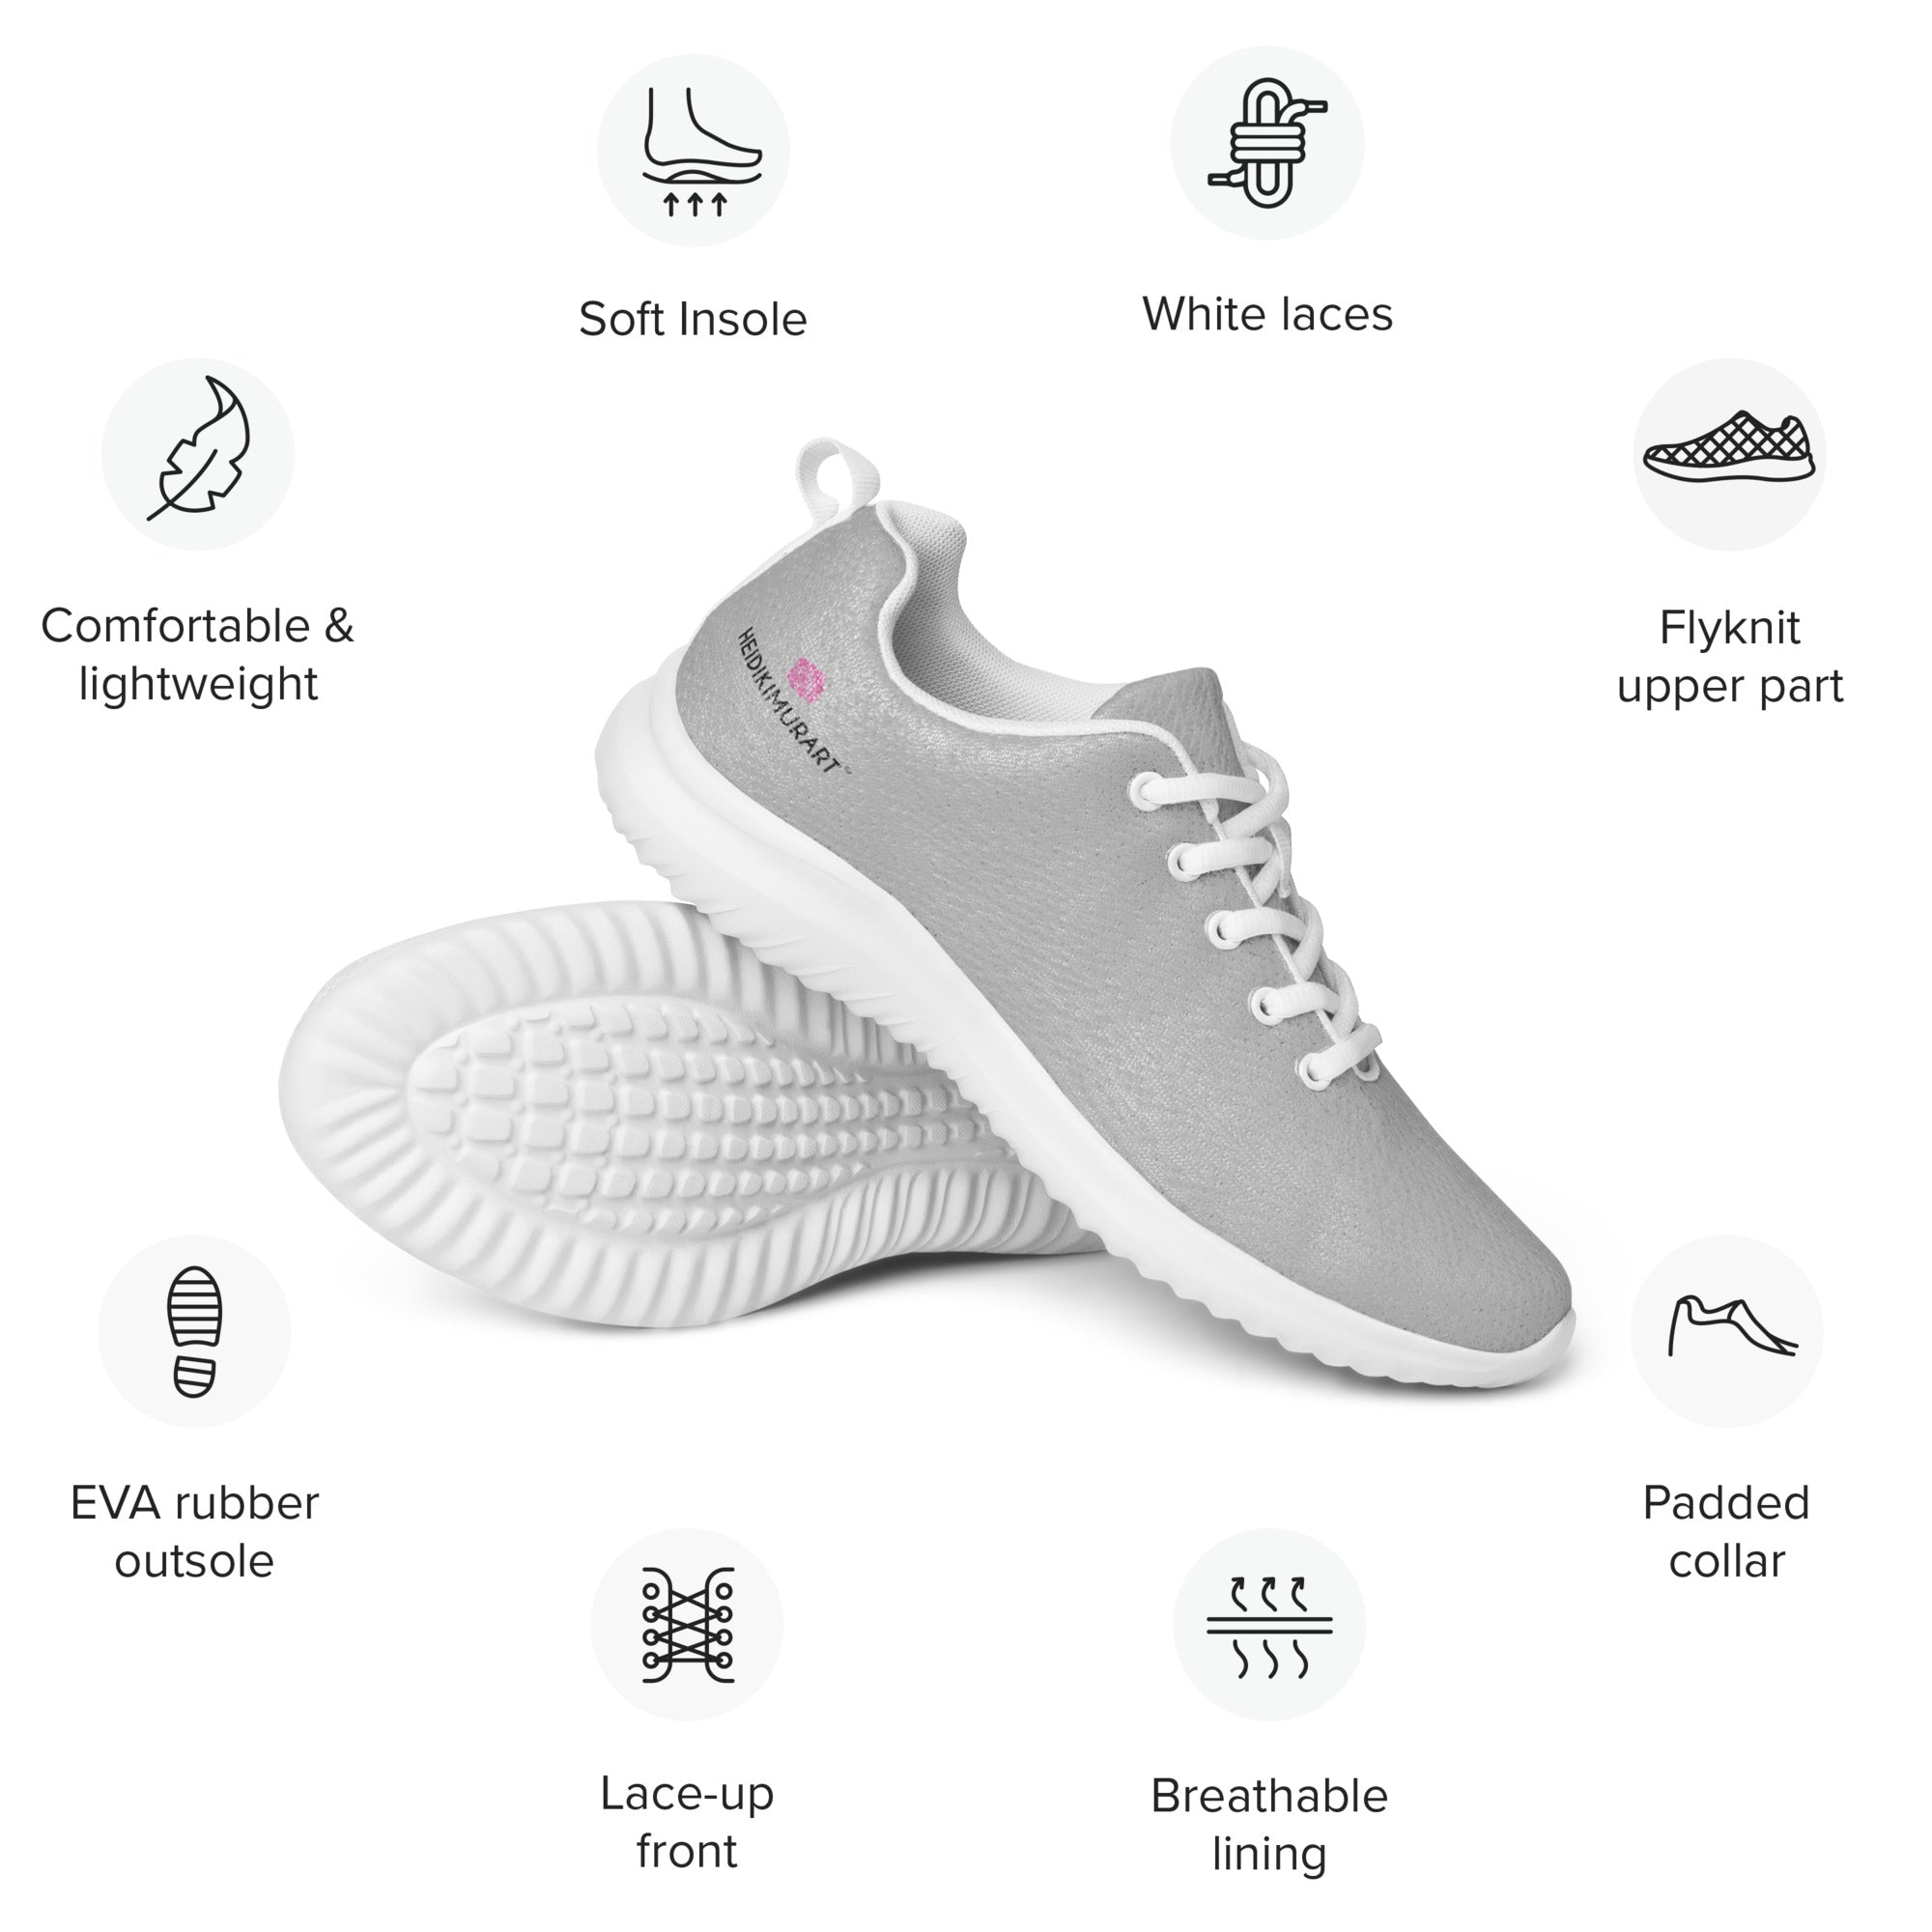 Grey Solid Color Men's Sneakers, Light Grey Solid Color Modern Breathable Lightweight Best Premium Designer Men’s Lace-up Low Top Sneakers, Modern Essential Classic Every Day Best Quality Fashionable Running Casual Canvas Breathable Comfortable Running Shoes With White Laces and Padded Tongues and Thick Outsoles (US Size: 5-13)